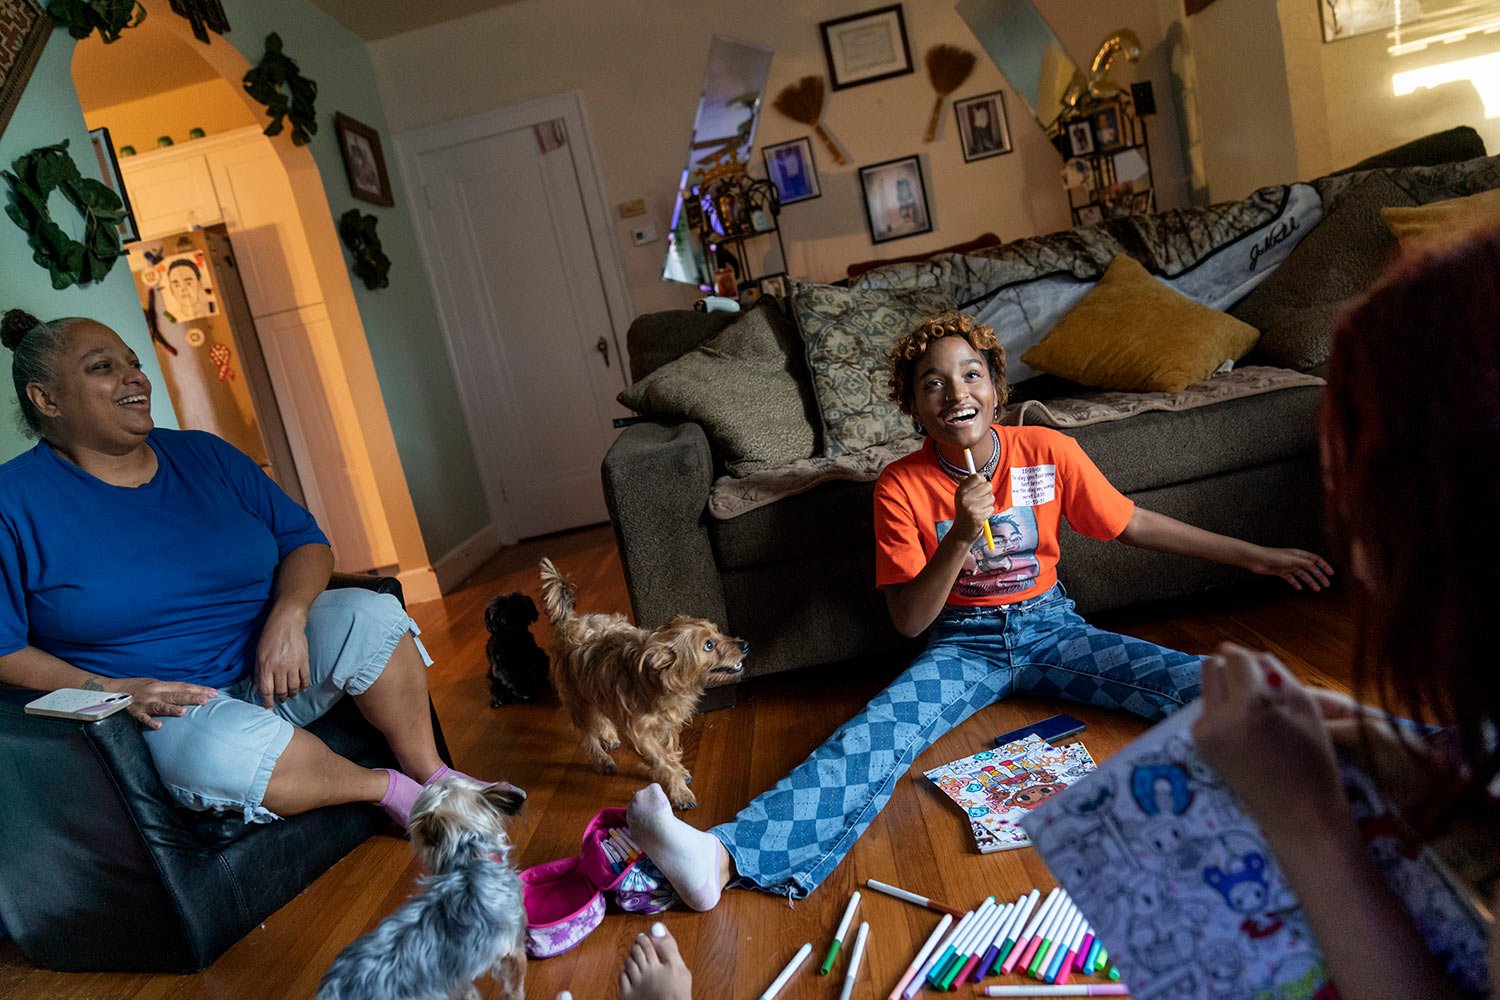  Navada Gwynn, 15, center, sings in the living room next to her mother, Krista, left, and sister, Victoria, 21, in Louisville, Ky, Monday, Aug. 28, 2023. (AP Photo/David Goldman)  